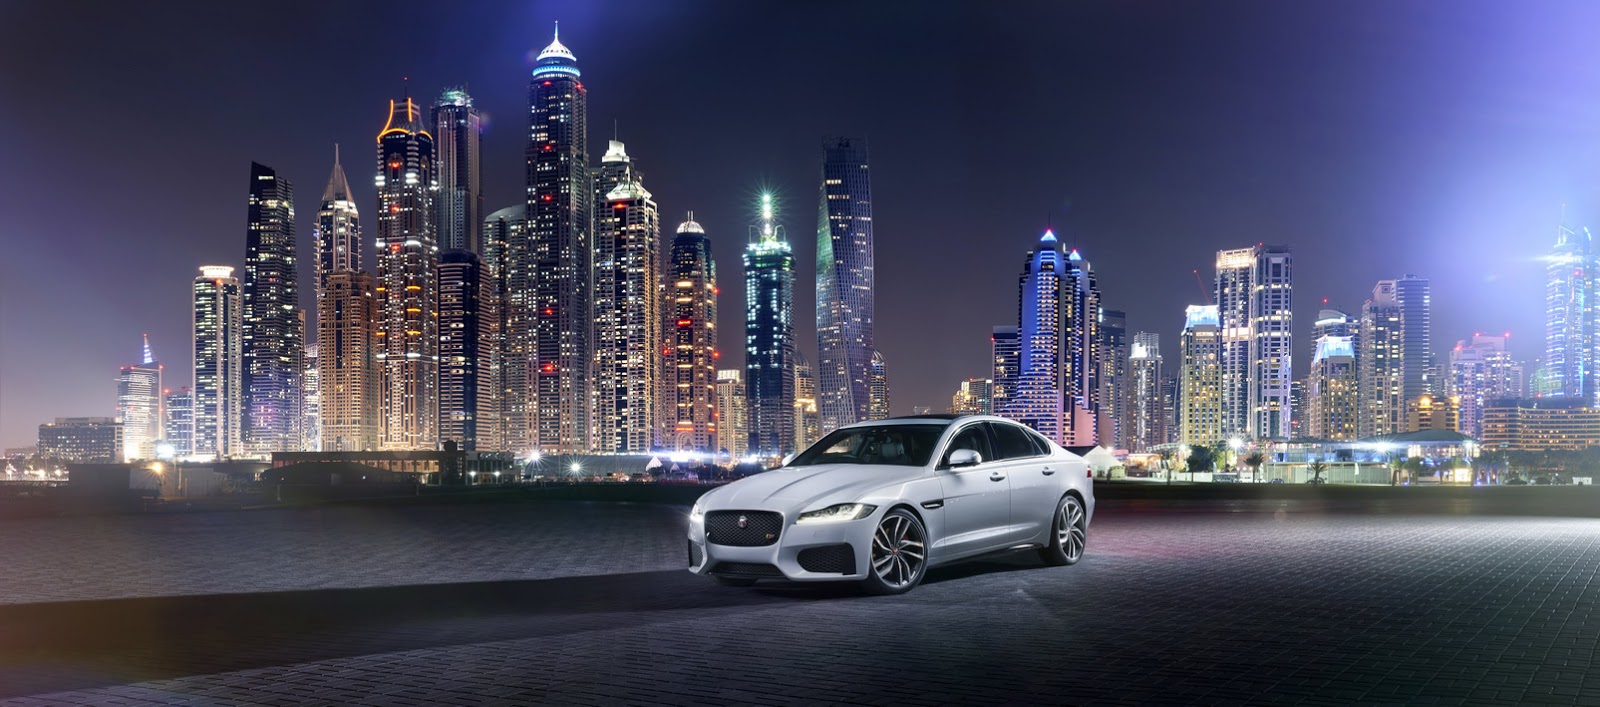 2016 Jaguar XF Drives Over A Wire – Gets Officially Unveiled in London in an Amazing Manner!